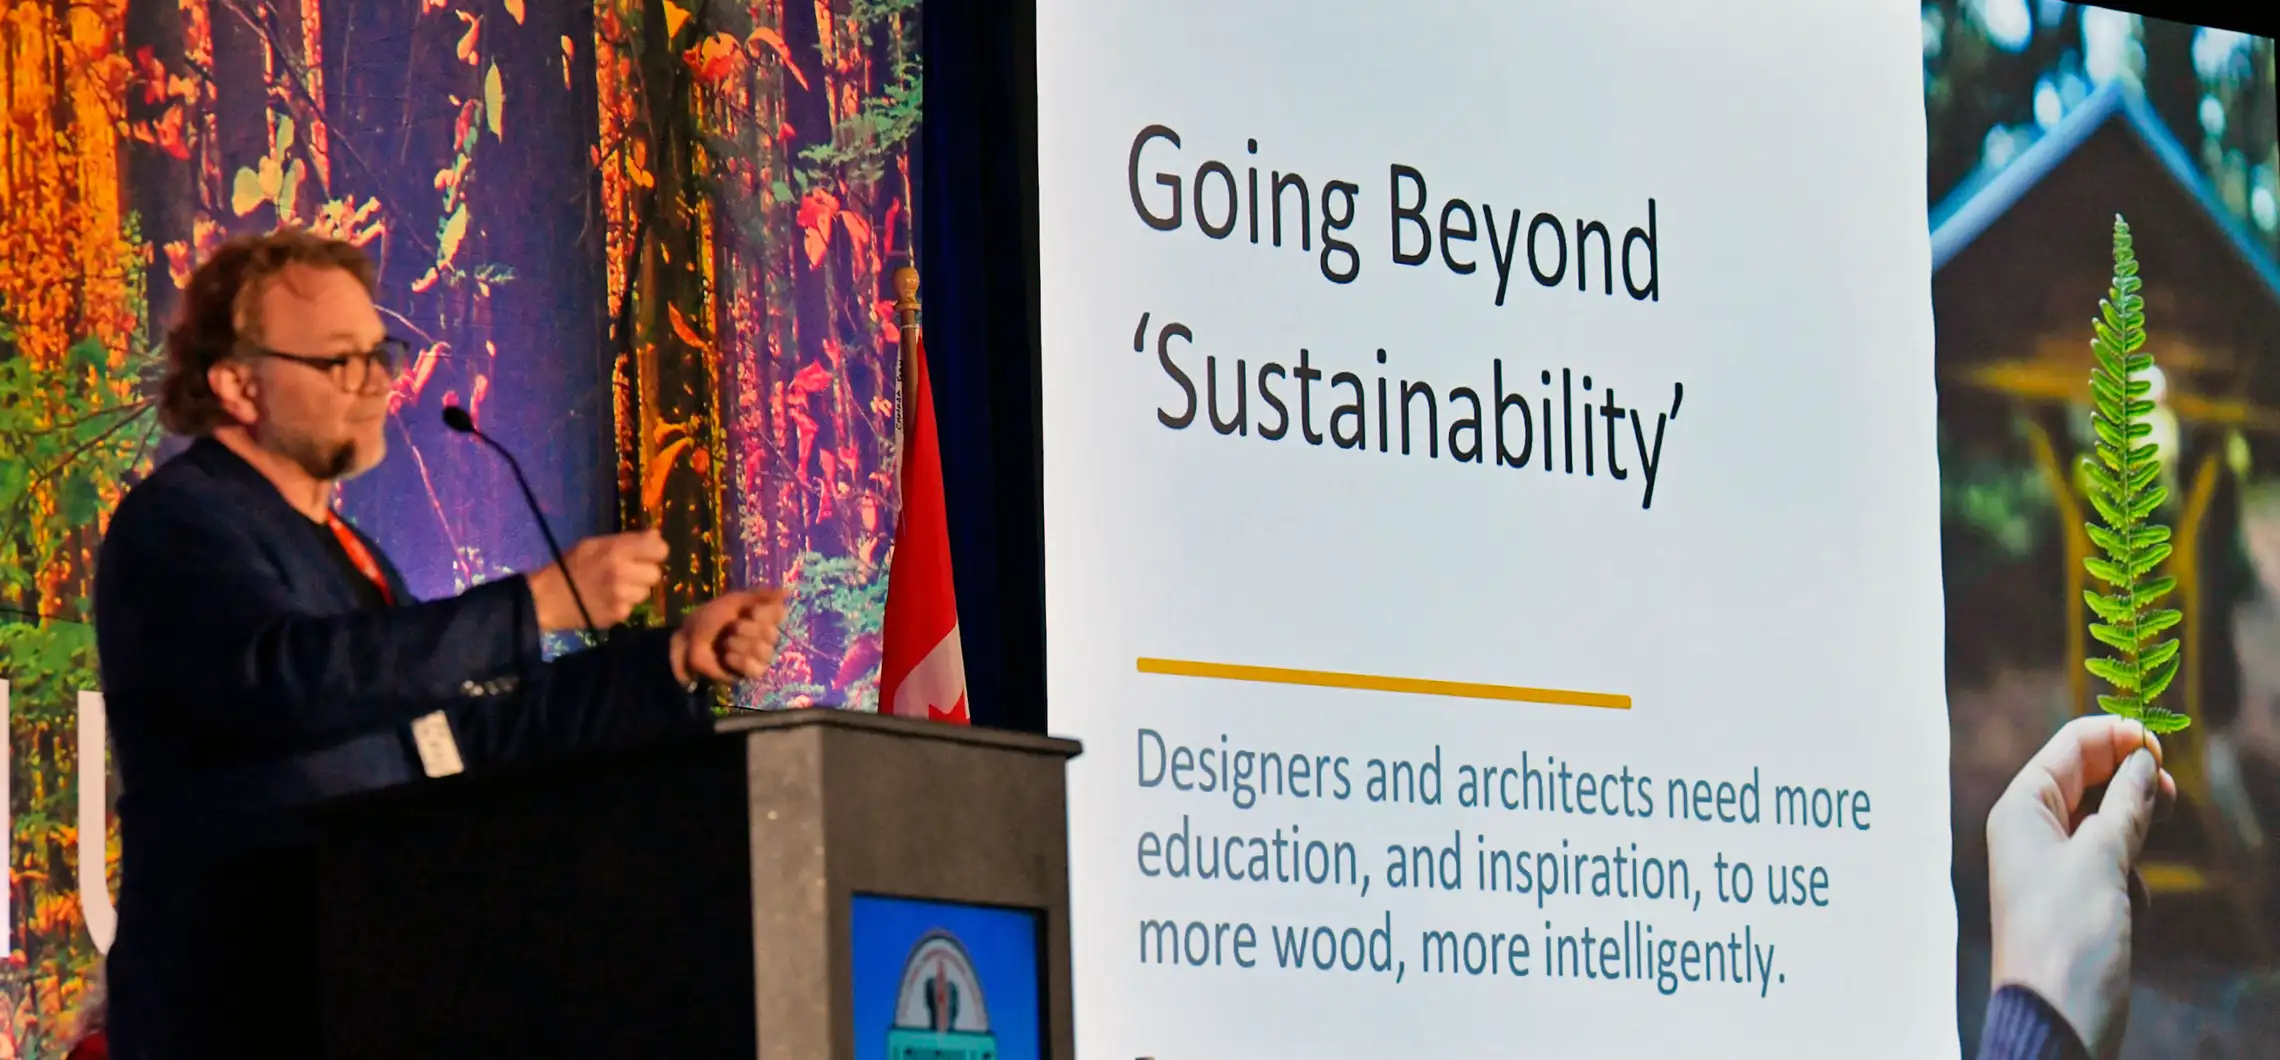 Going Beyond Sustainability in the hardwood industry